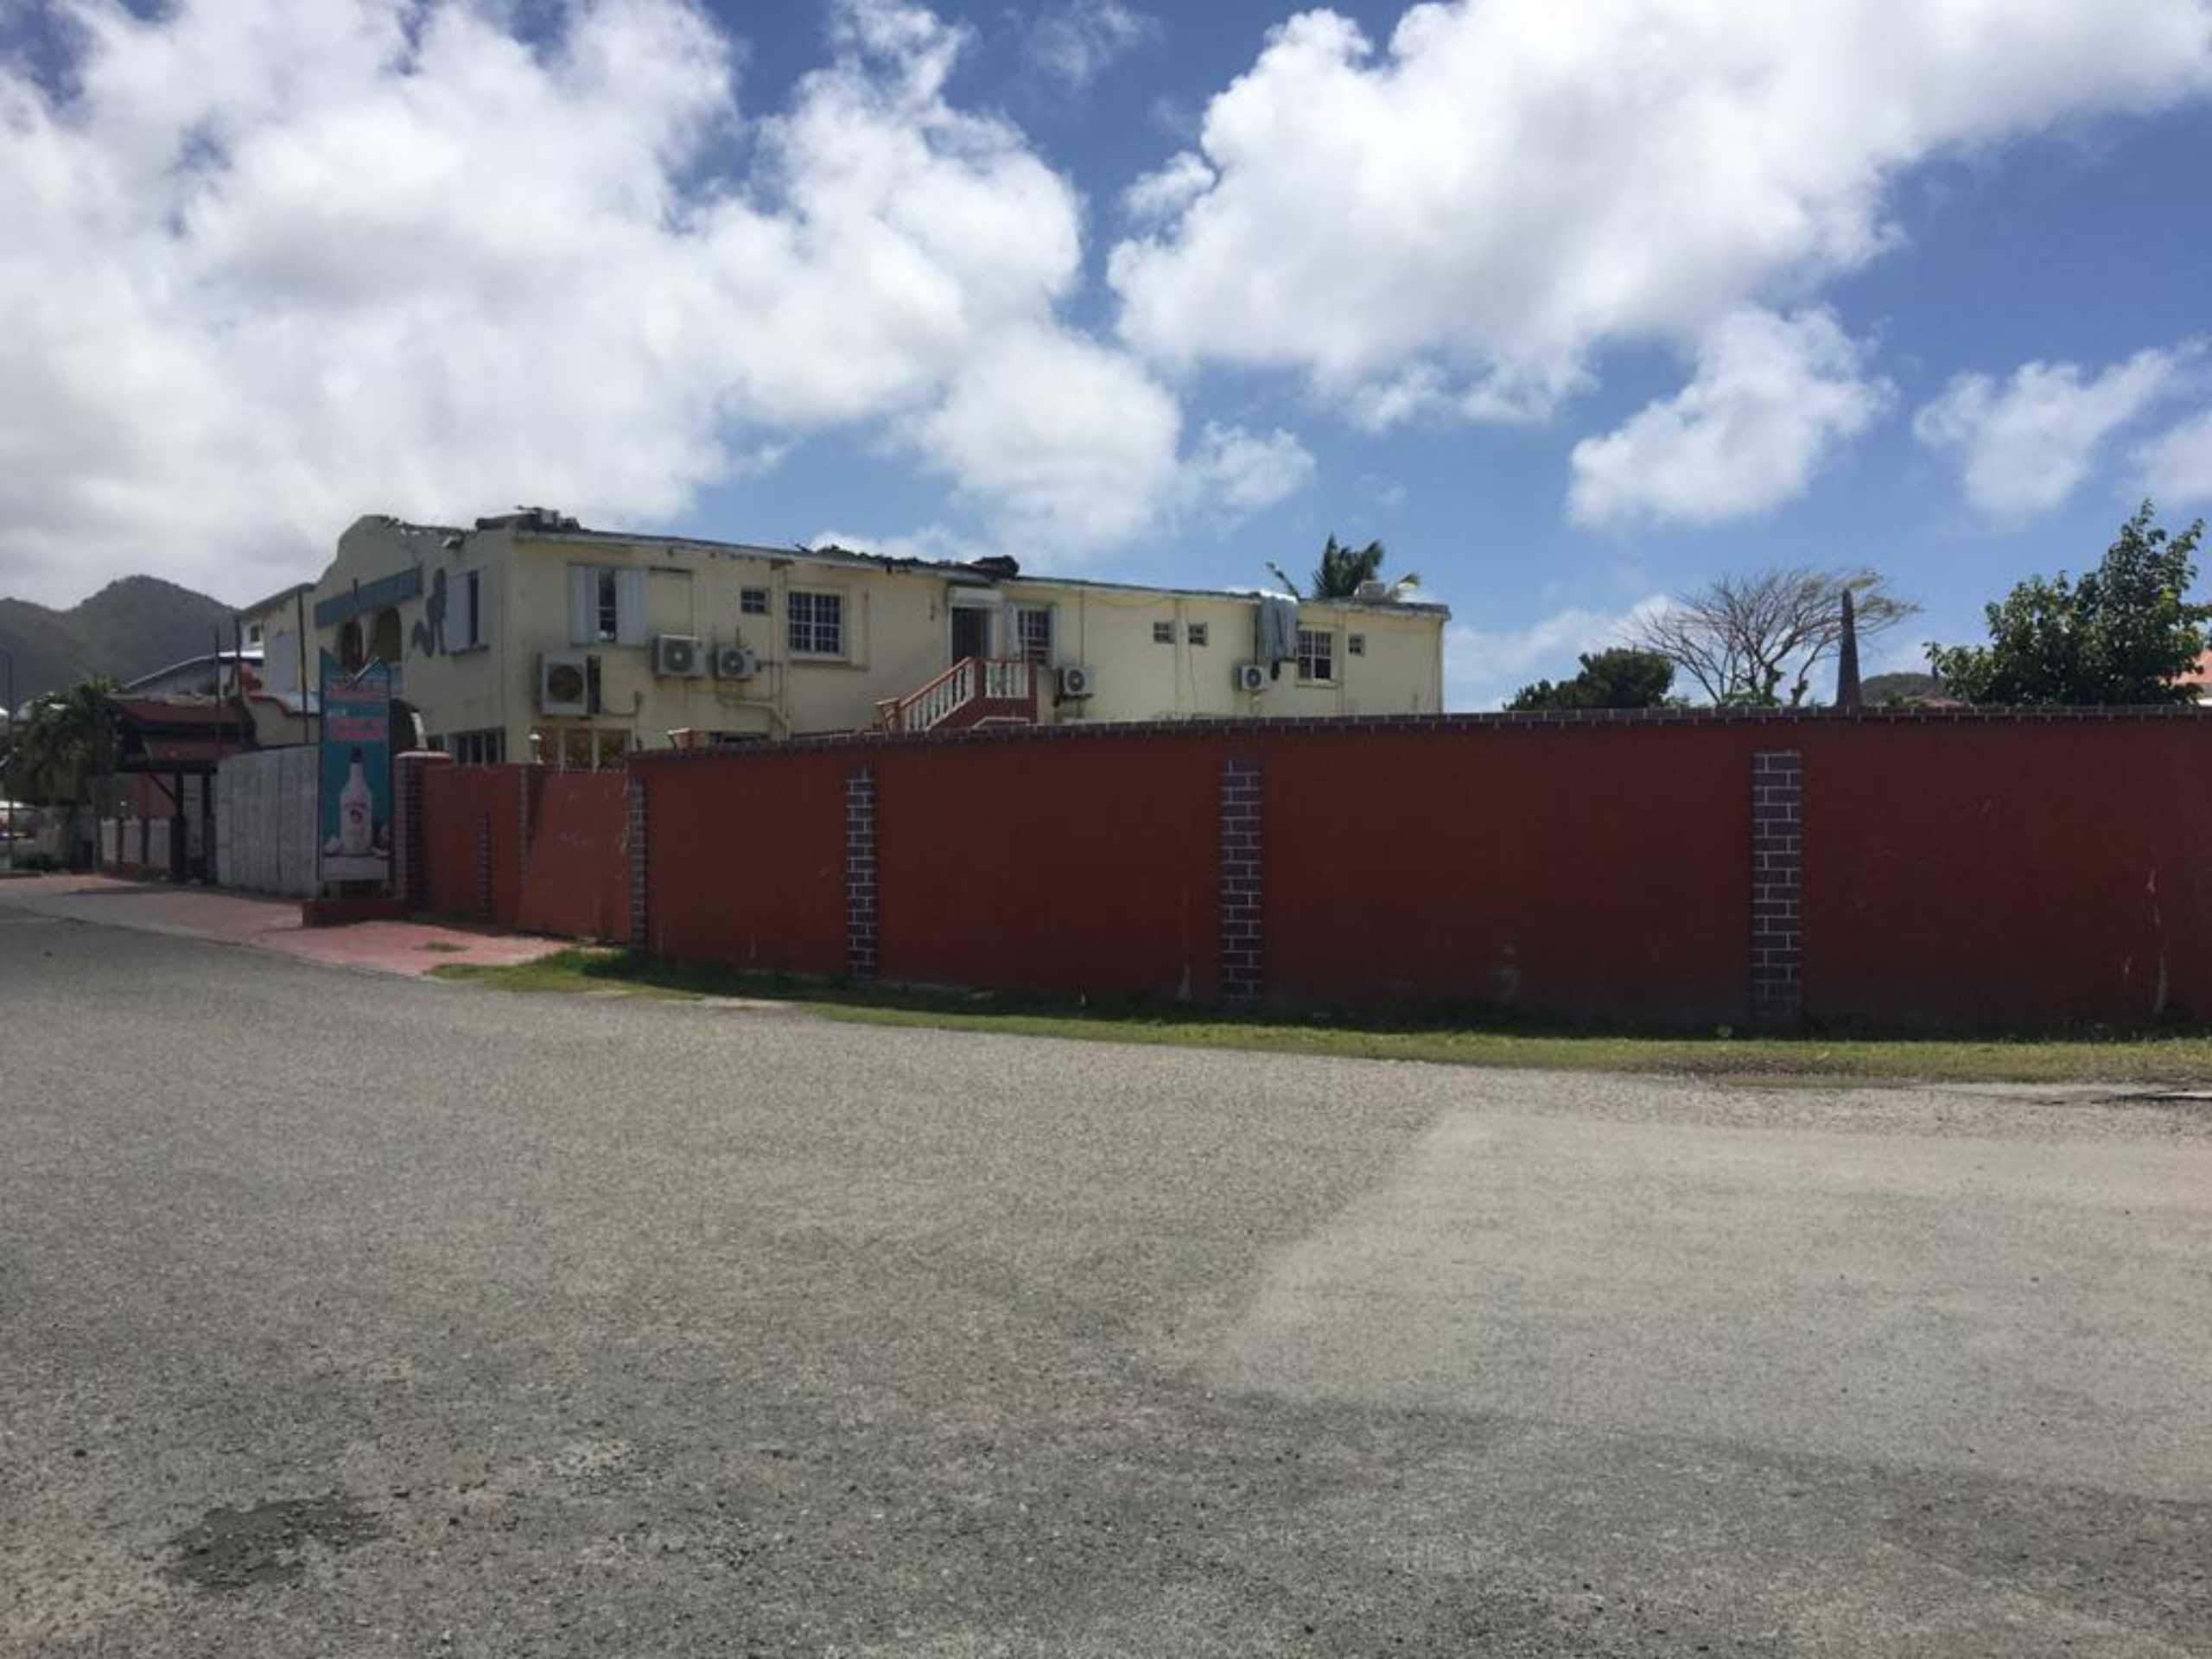 Simpson Bay Fixer-Upper 20 Bedroom Hotel Near Airport For Sale